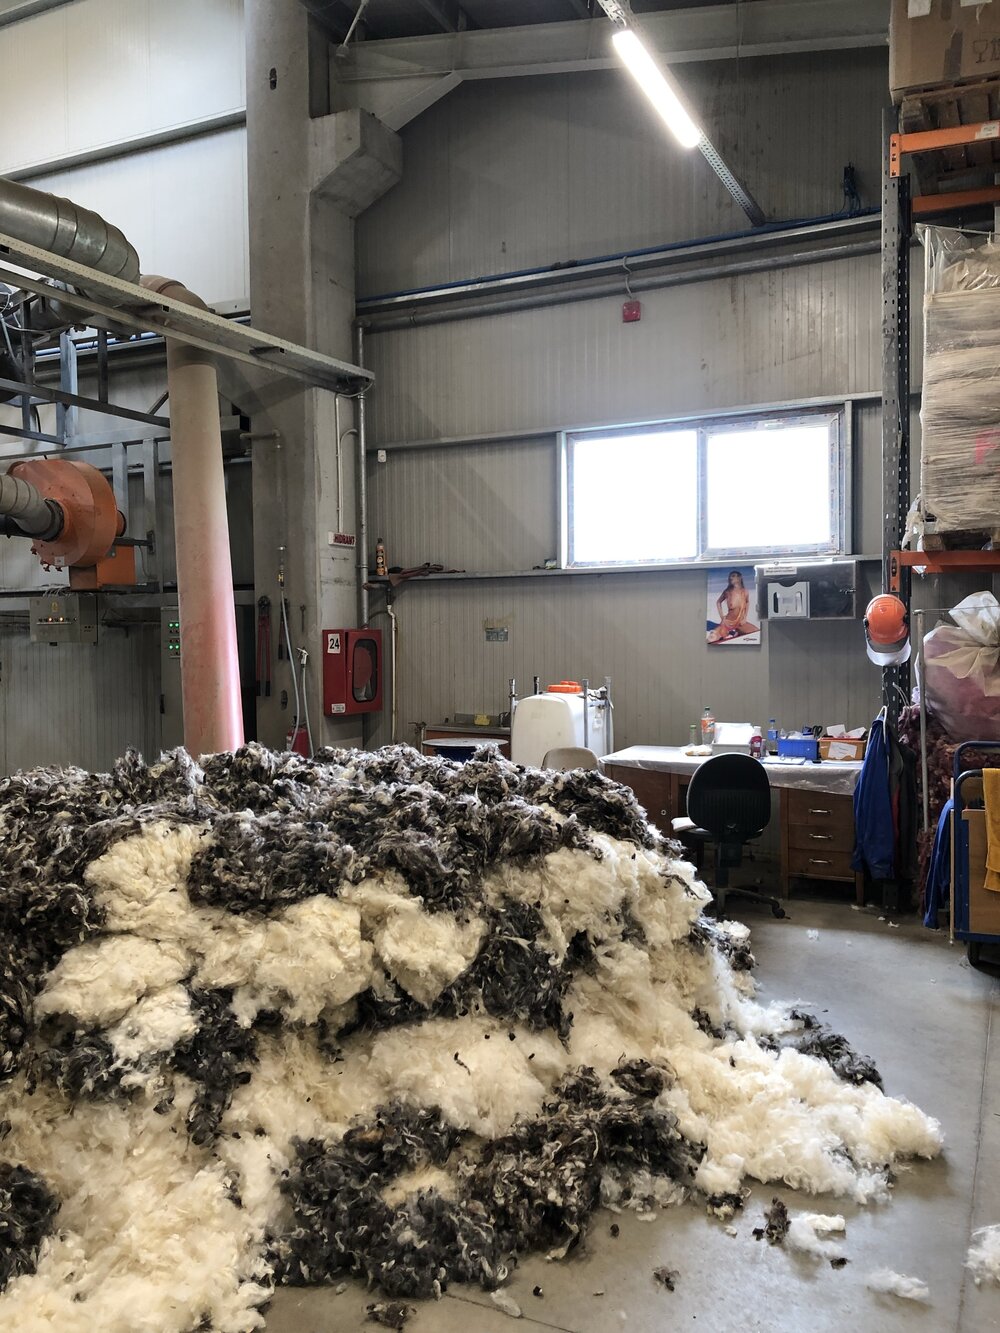 Wool in process, being sorted.